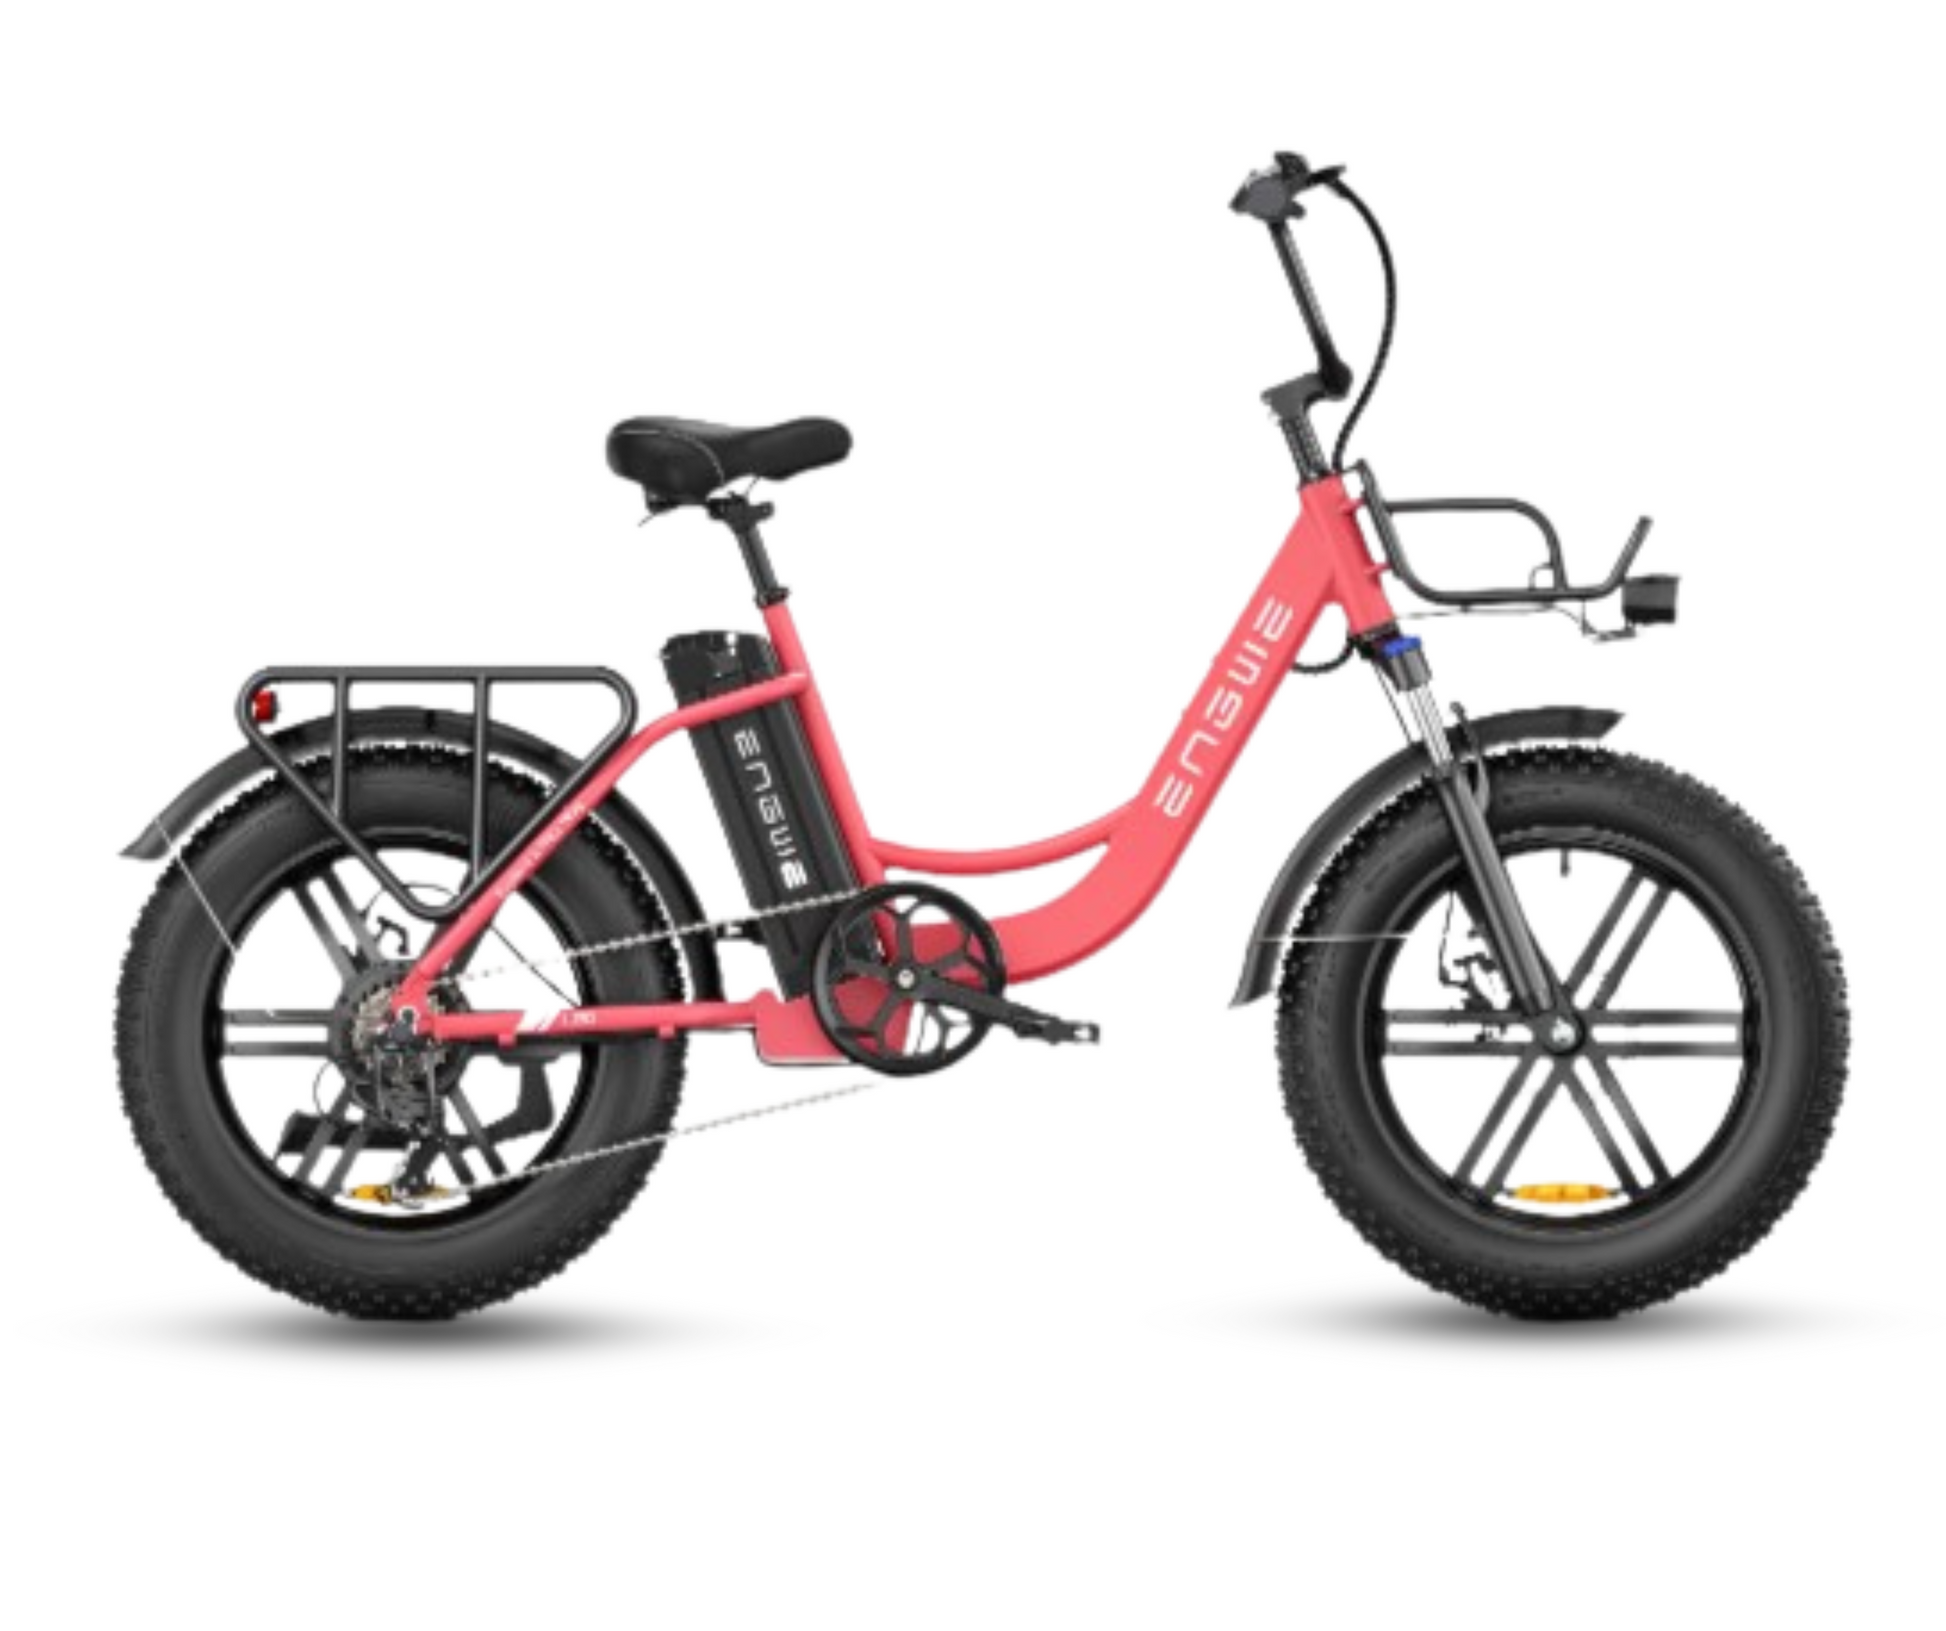 Side view of Engwe L20 electric bike in vibrant pink with full-frame and fat tires.